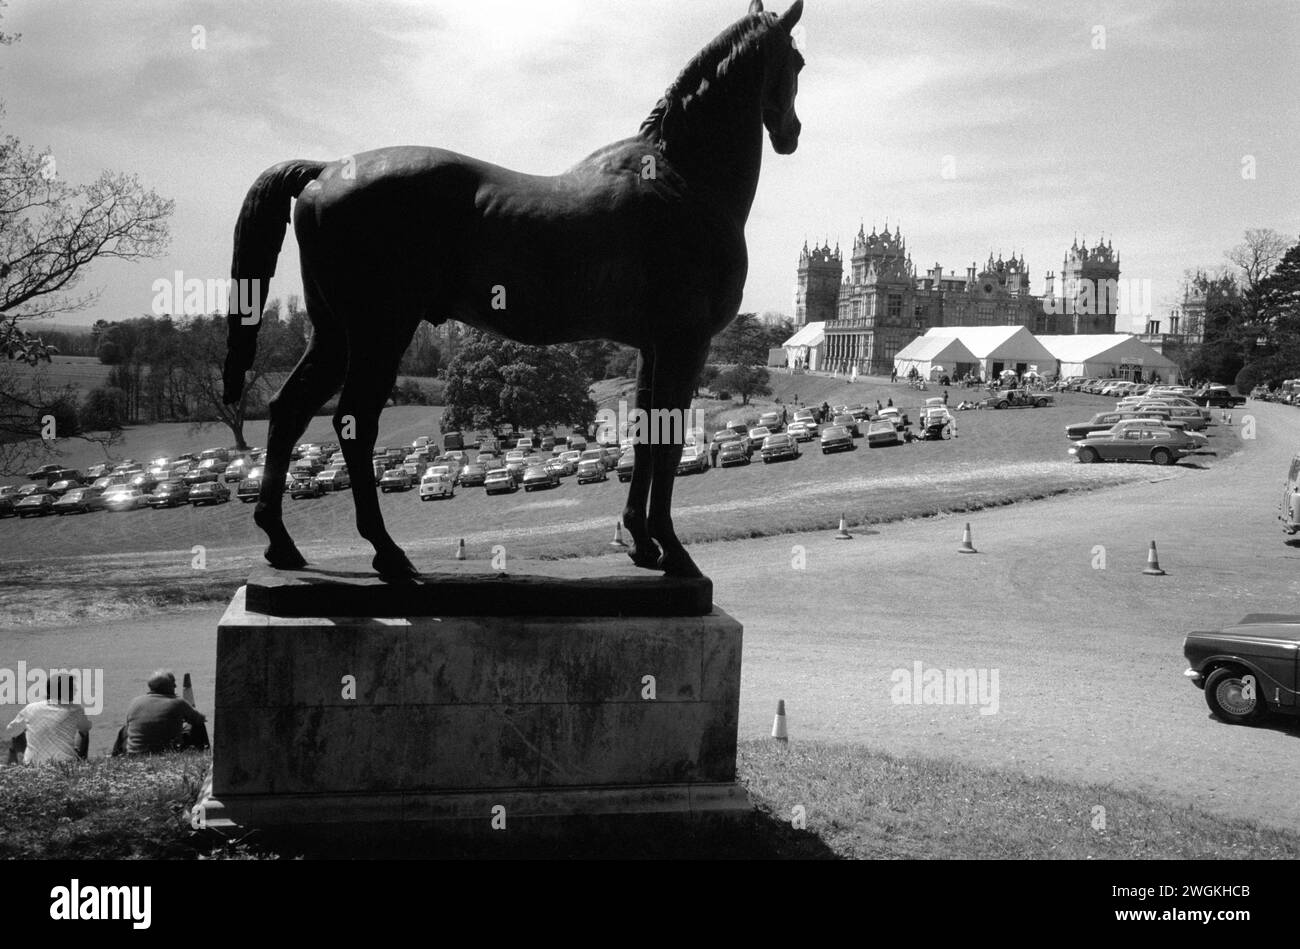 Sothebys country house auction at Mentmore Towers, Buckinghamshire, England May 1977. The bronze statue of the horse is King Tom, race winning stallion of 1871, that founded the de Rothschild stud at Mentmore Towers. The horse was not sold and is now at the family home Dalmeny House, Edinburgh, Scotland. 1970s UK HOMER SYKES Stock Photo